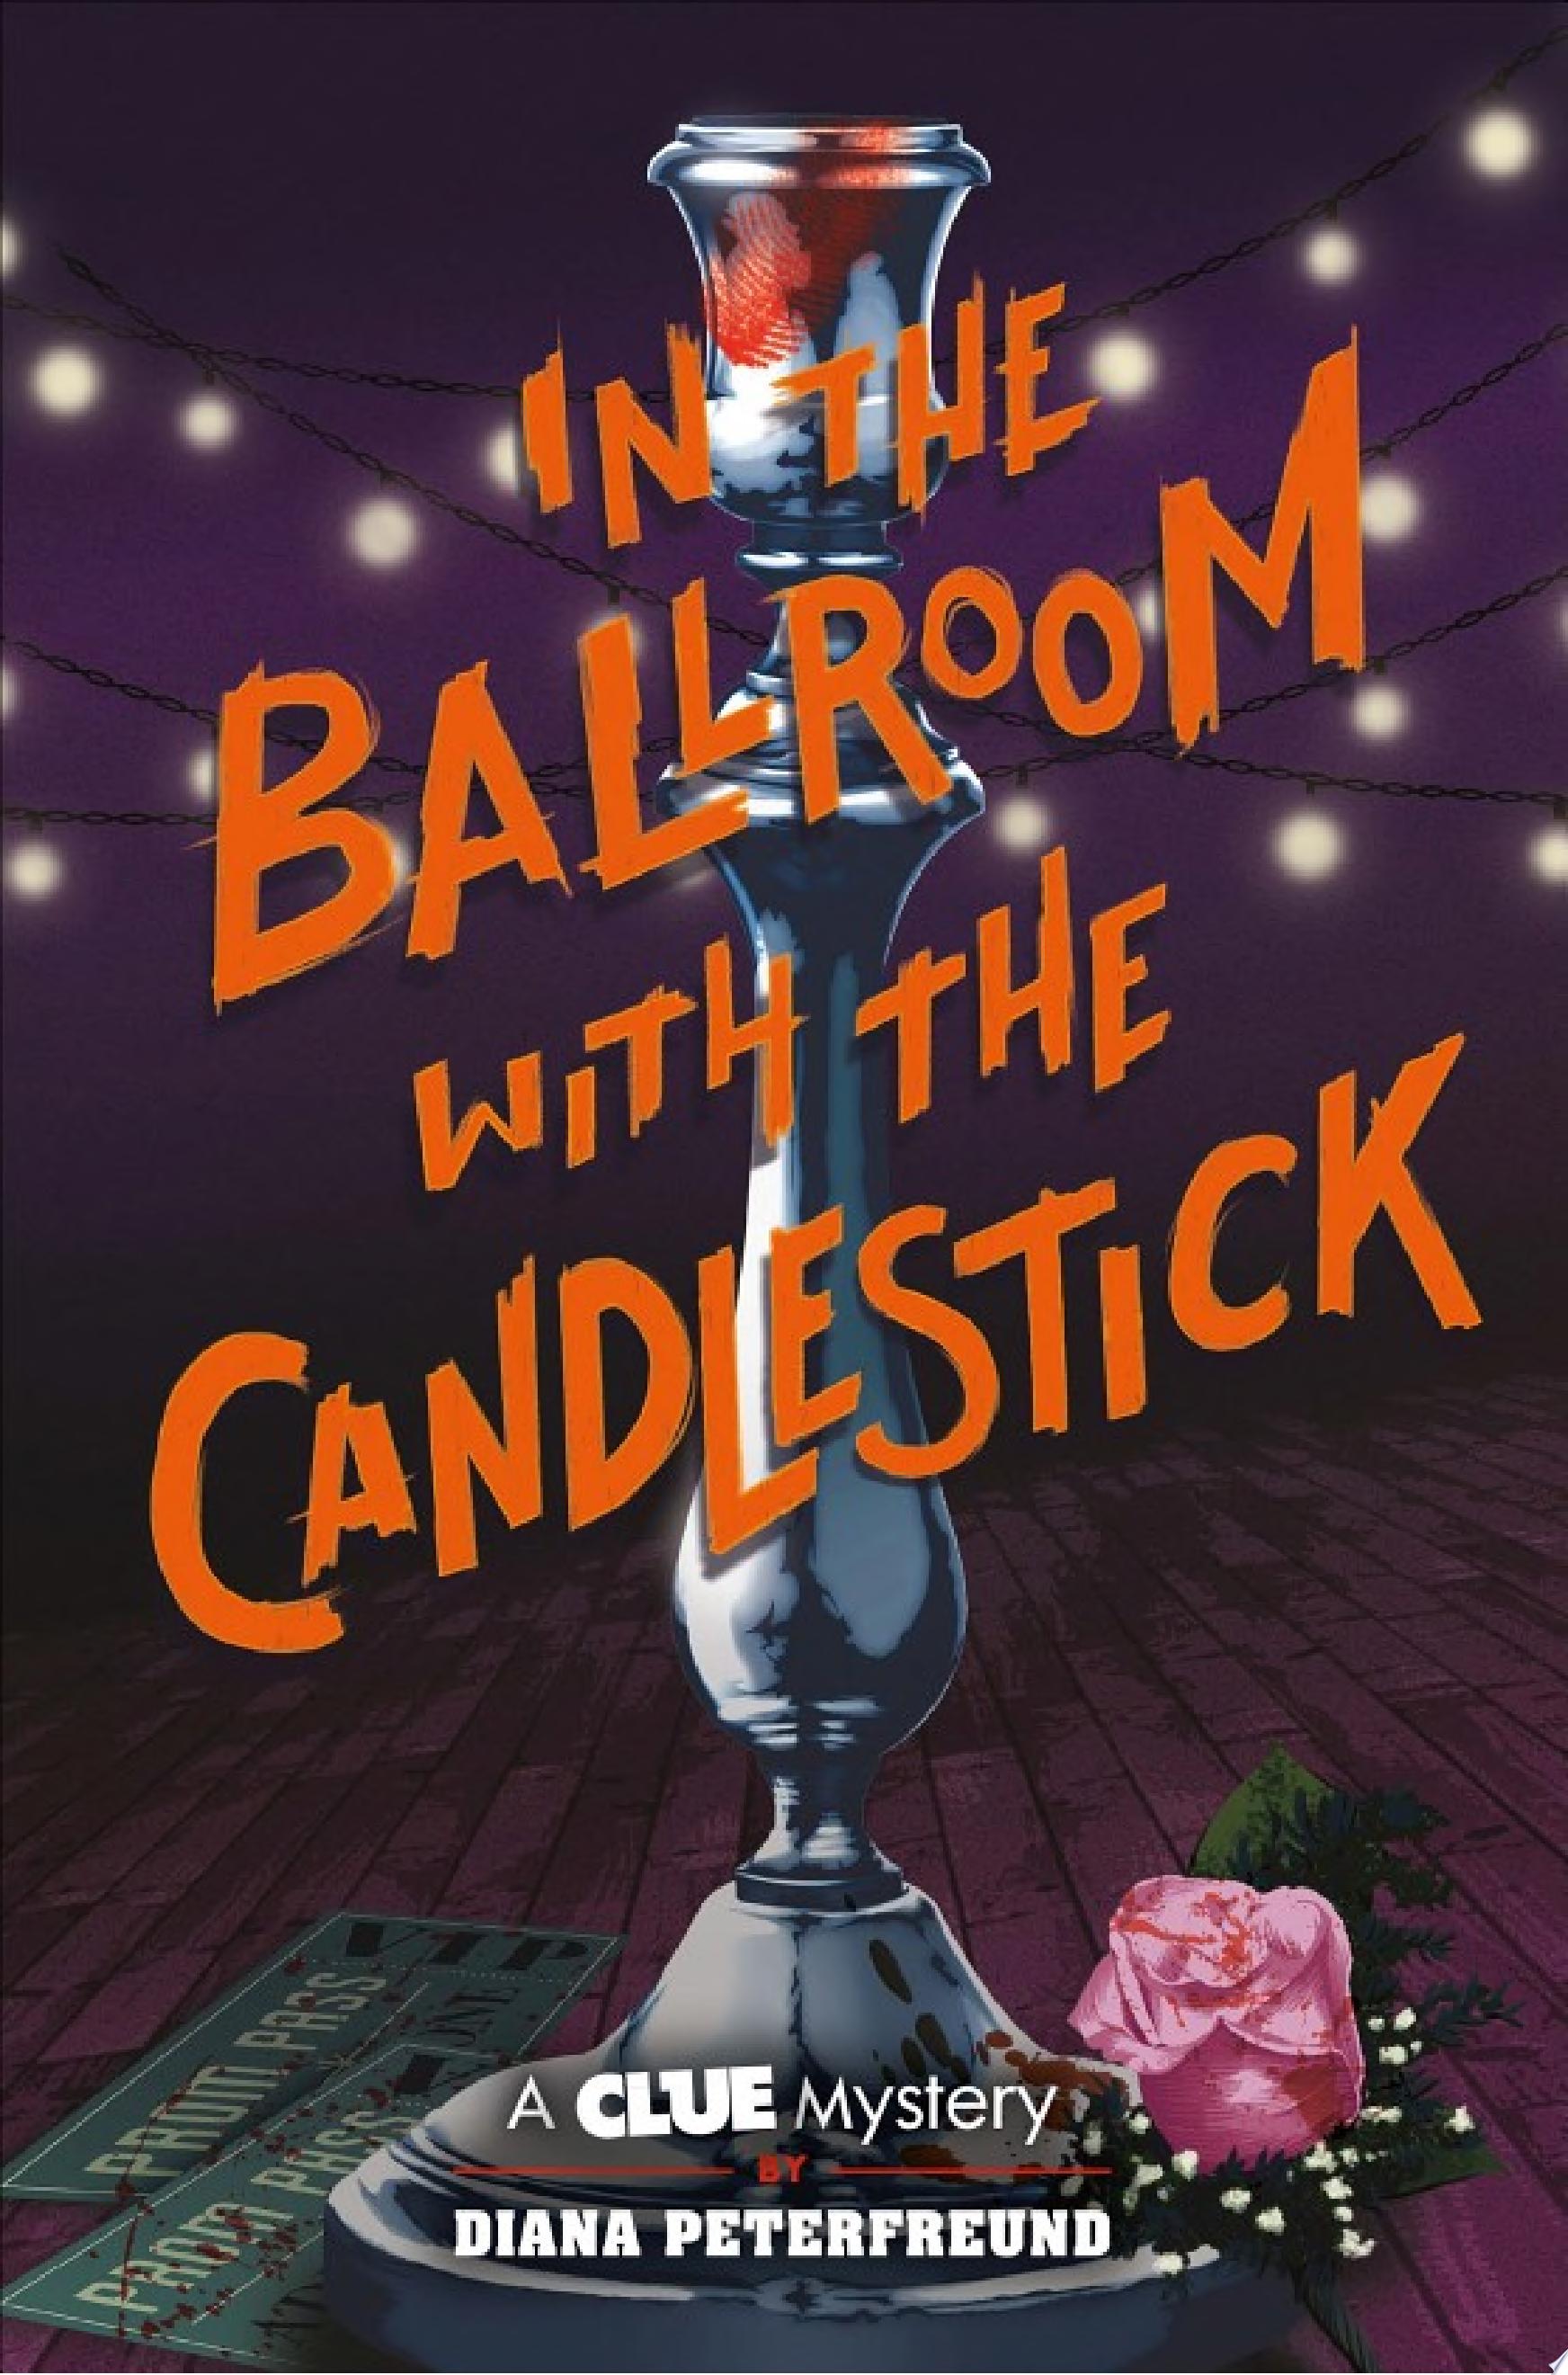 Image for "In the Ballroom with the Candlestick"